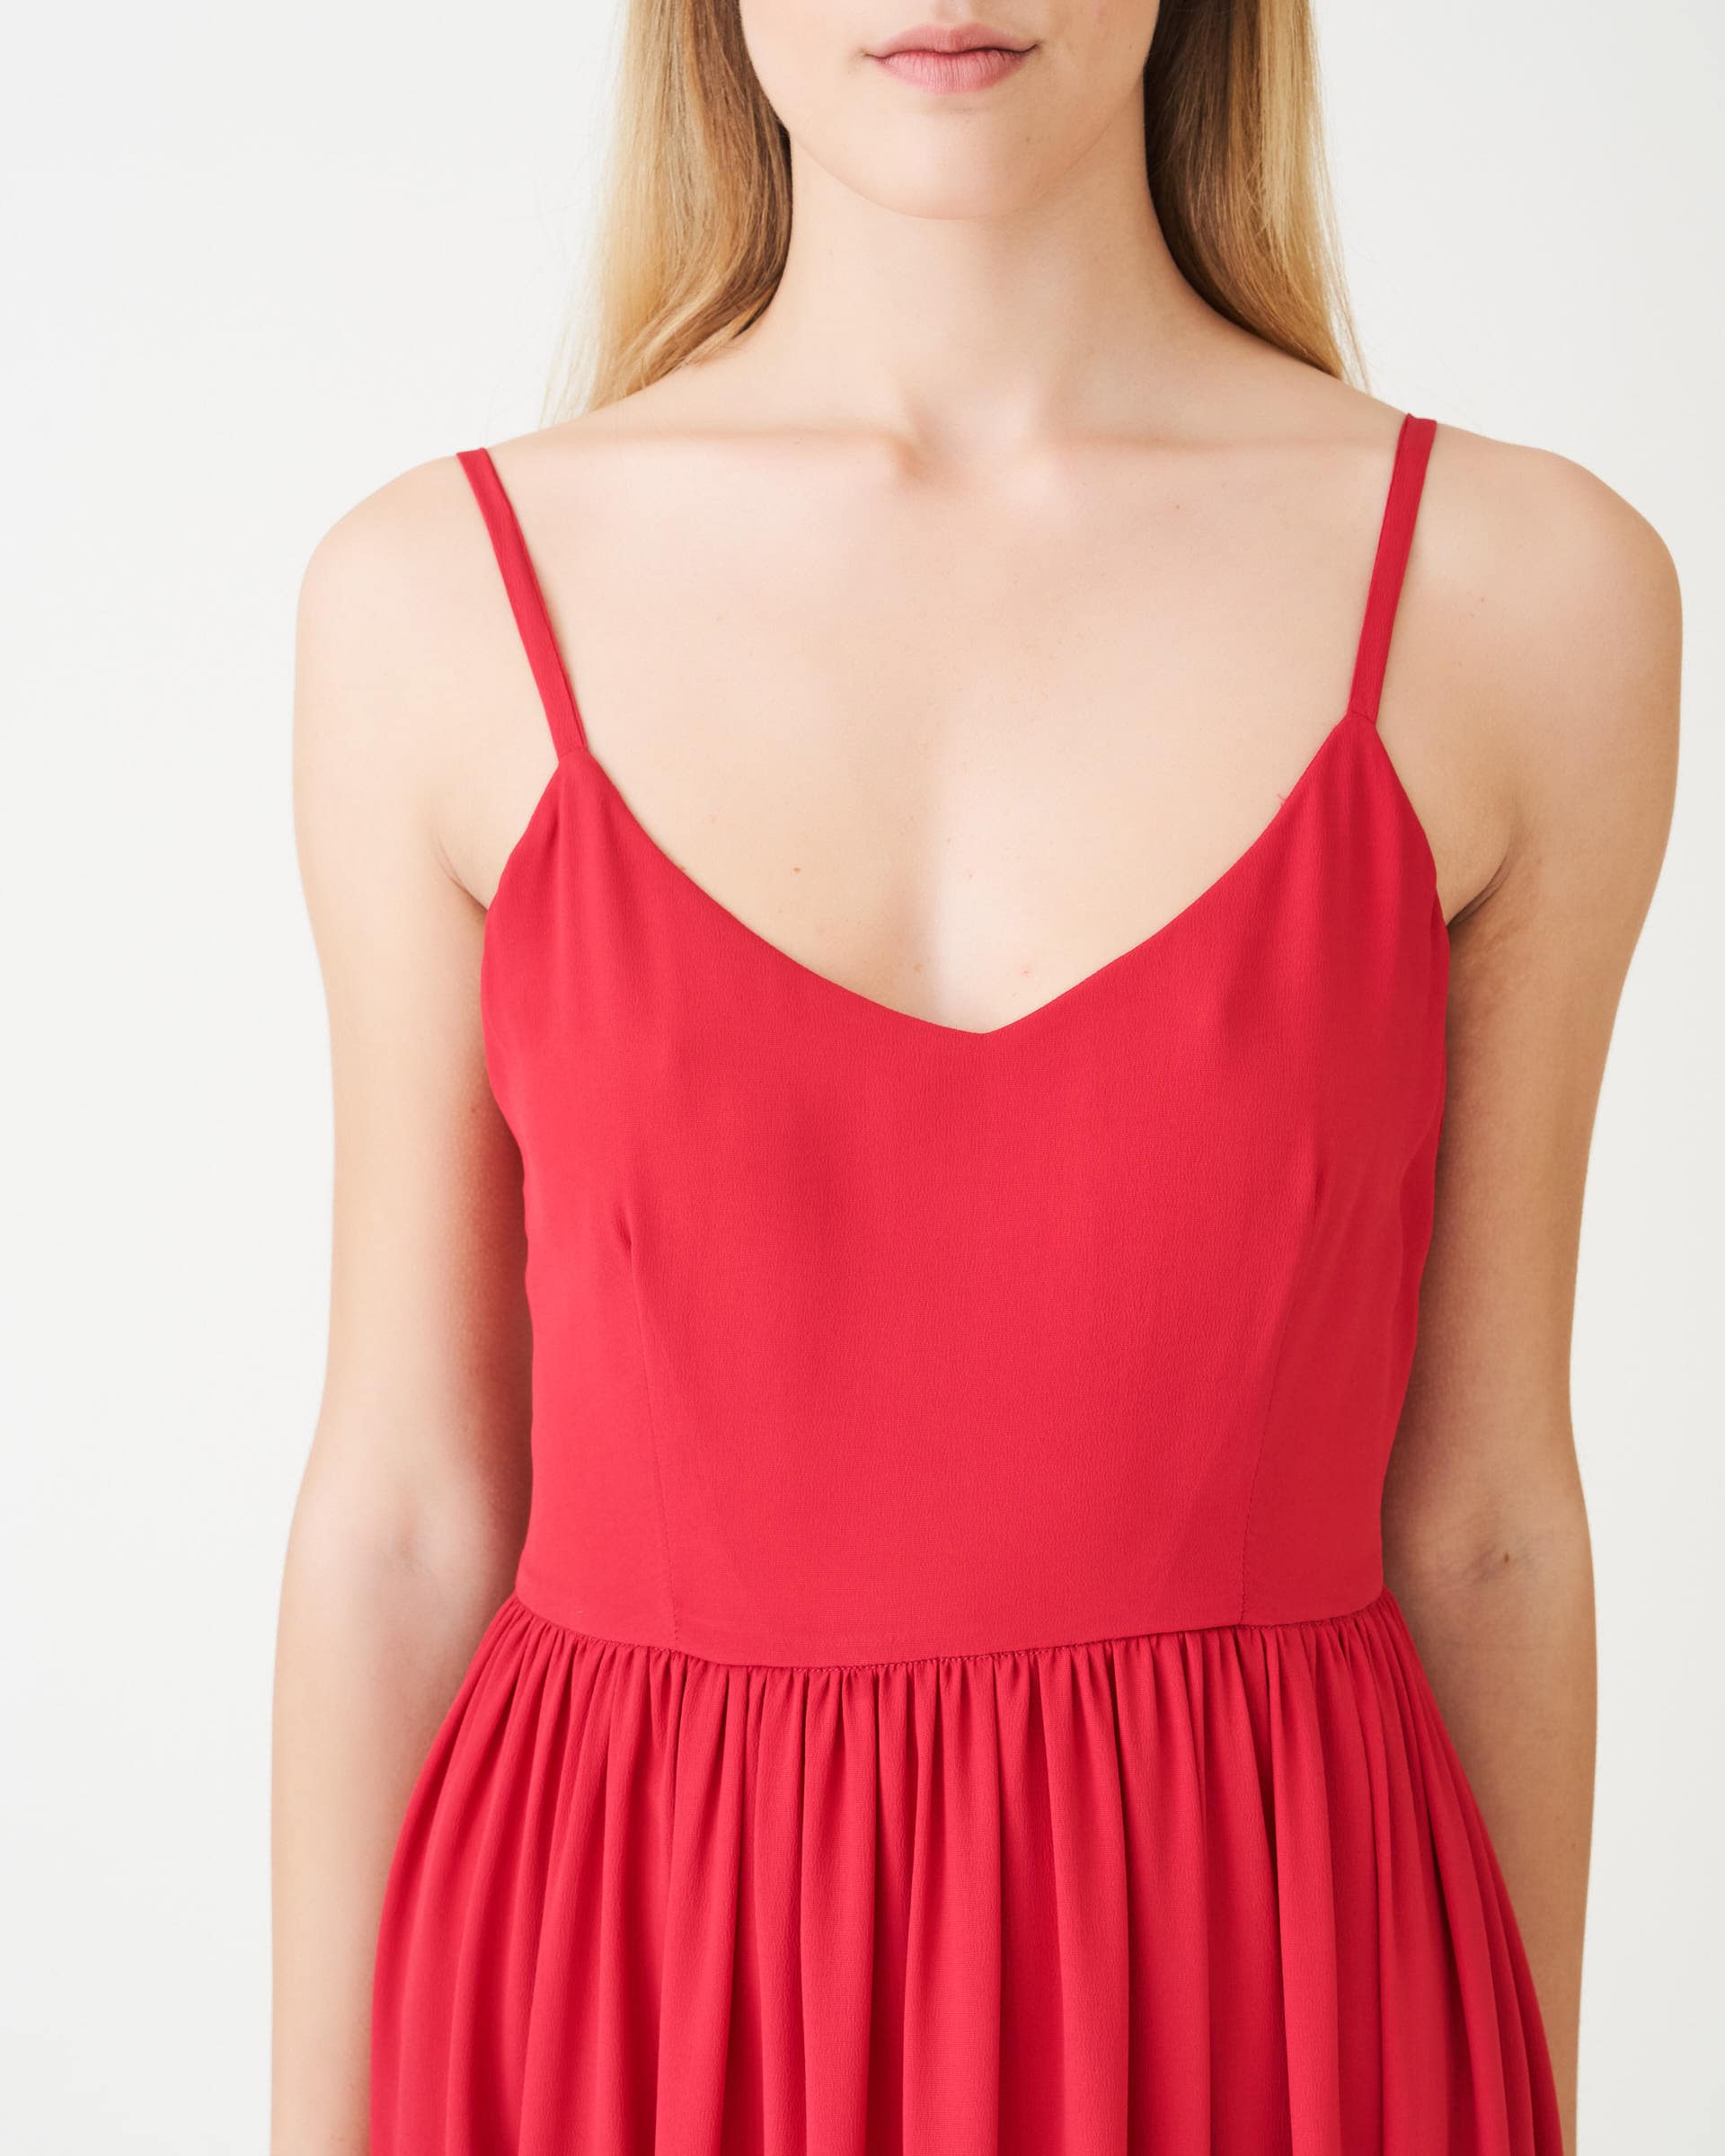 The Market Store | Dress With Shoulder Straps